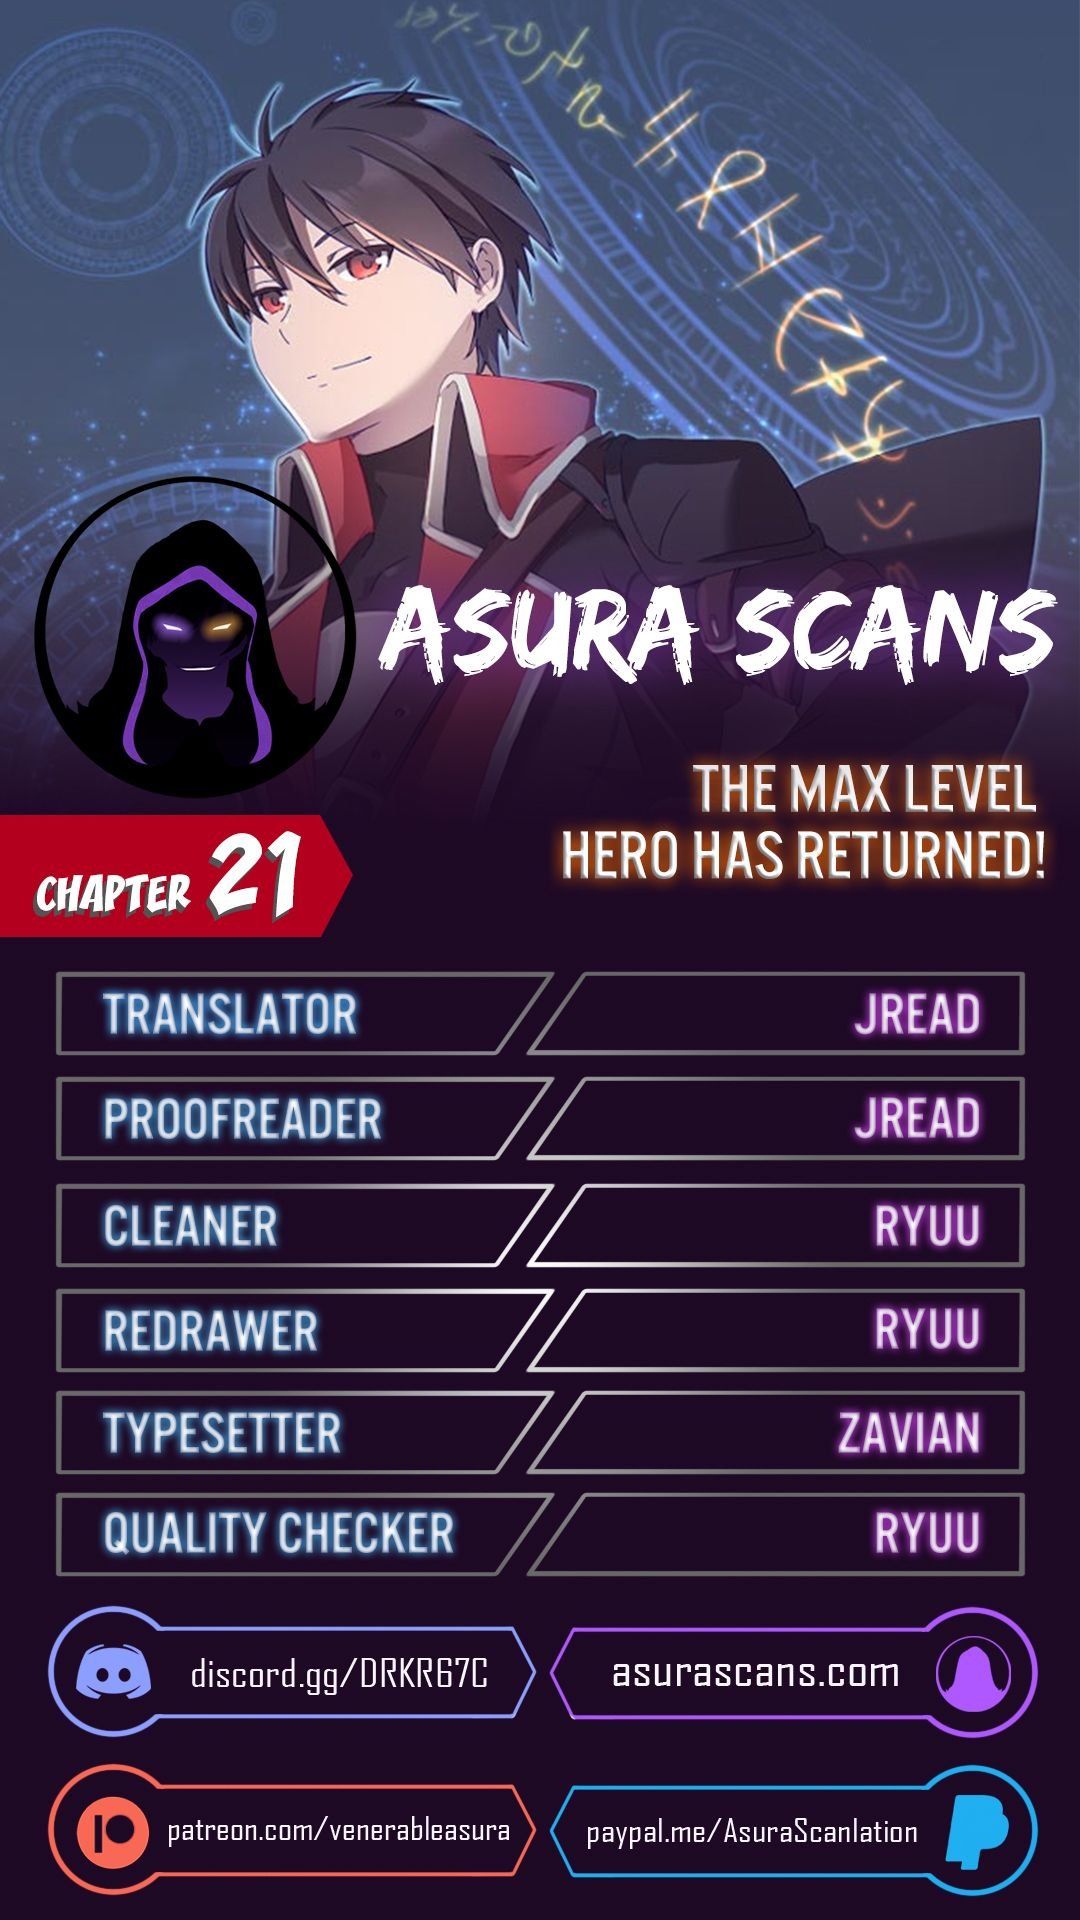 The MAX leveled hero will return! Chapter 21